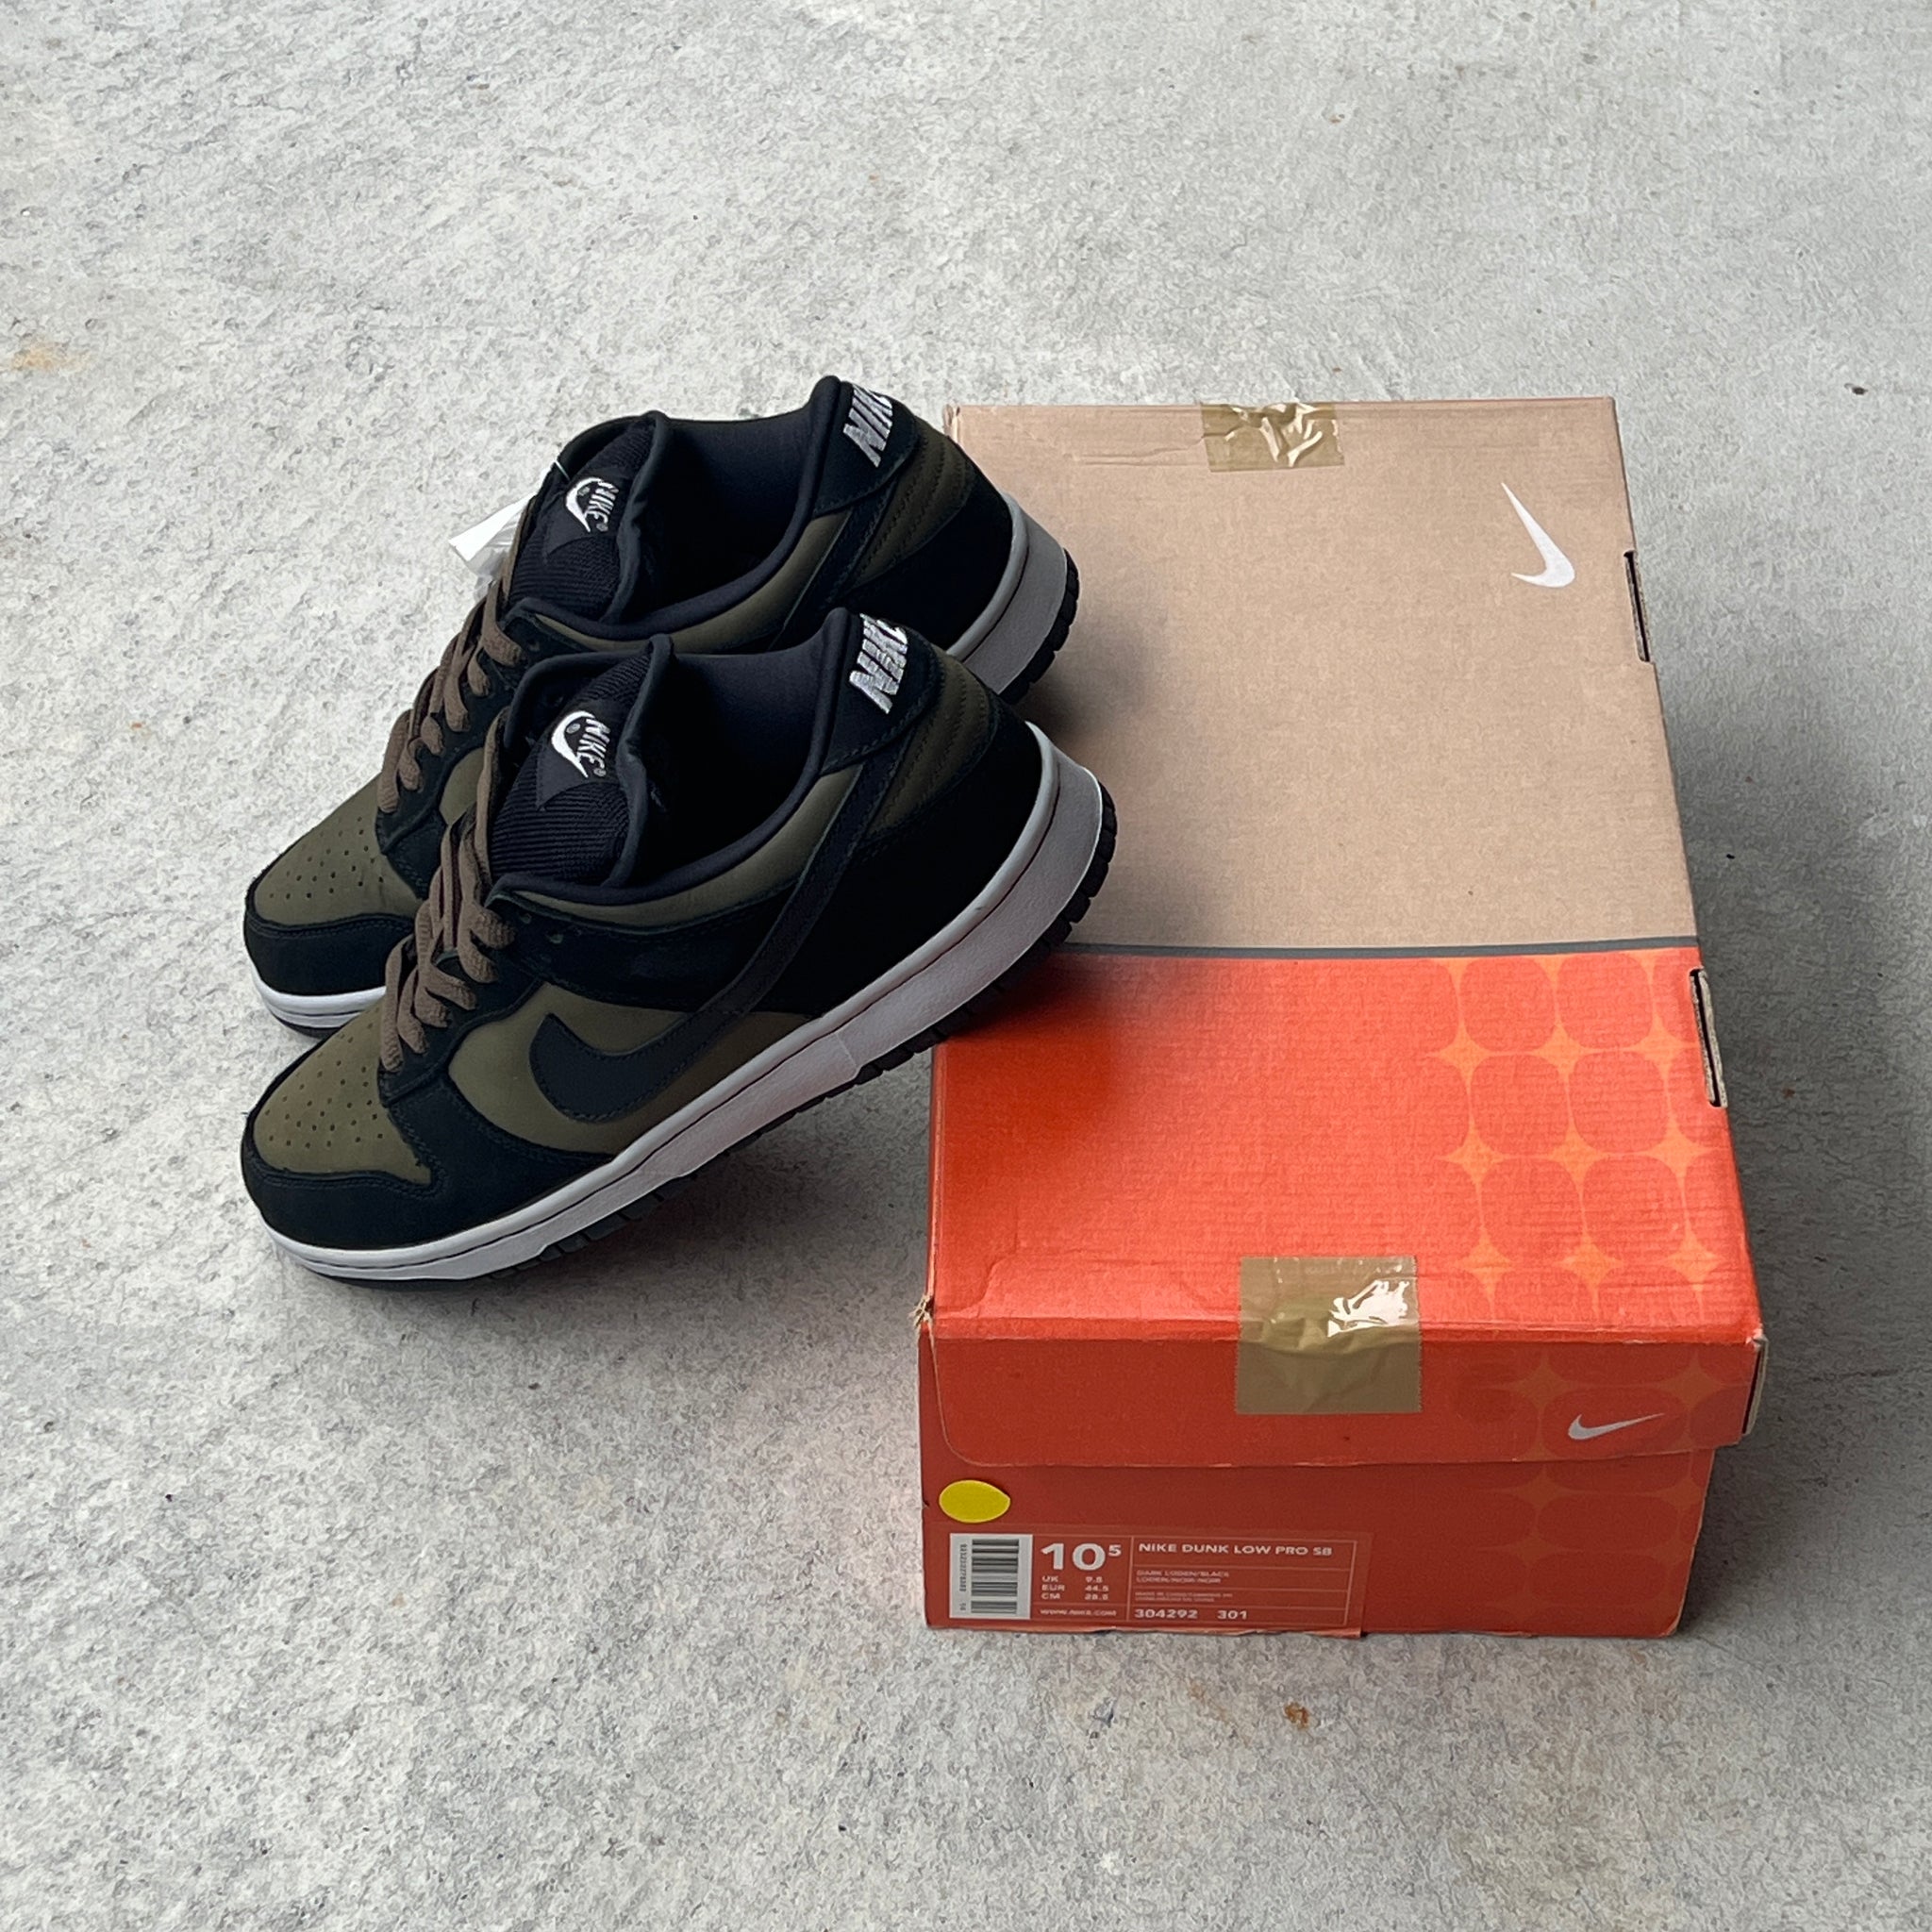 10.5 US - DS NIKE SB DUNK LOW LODEN W BOX 2002